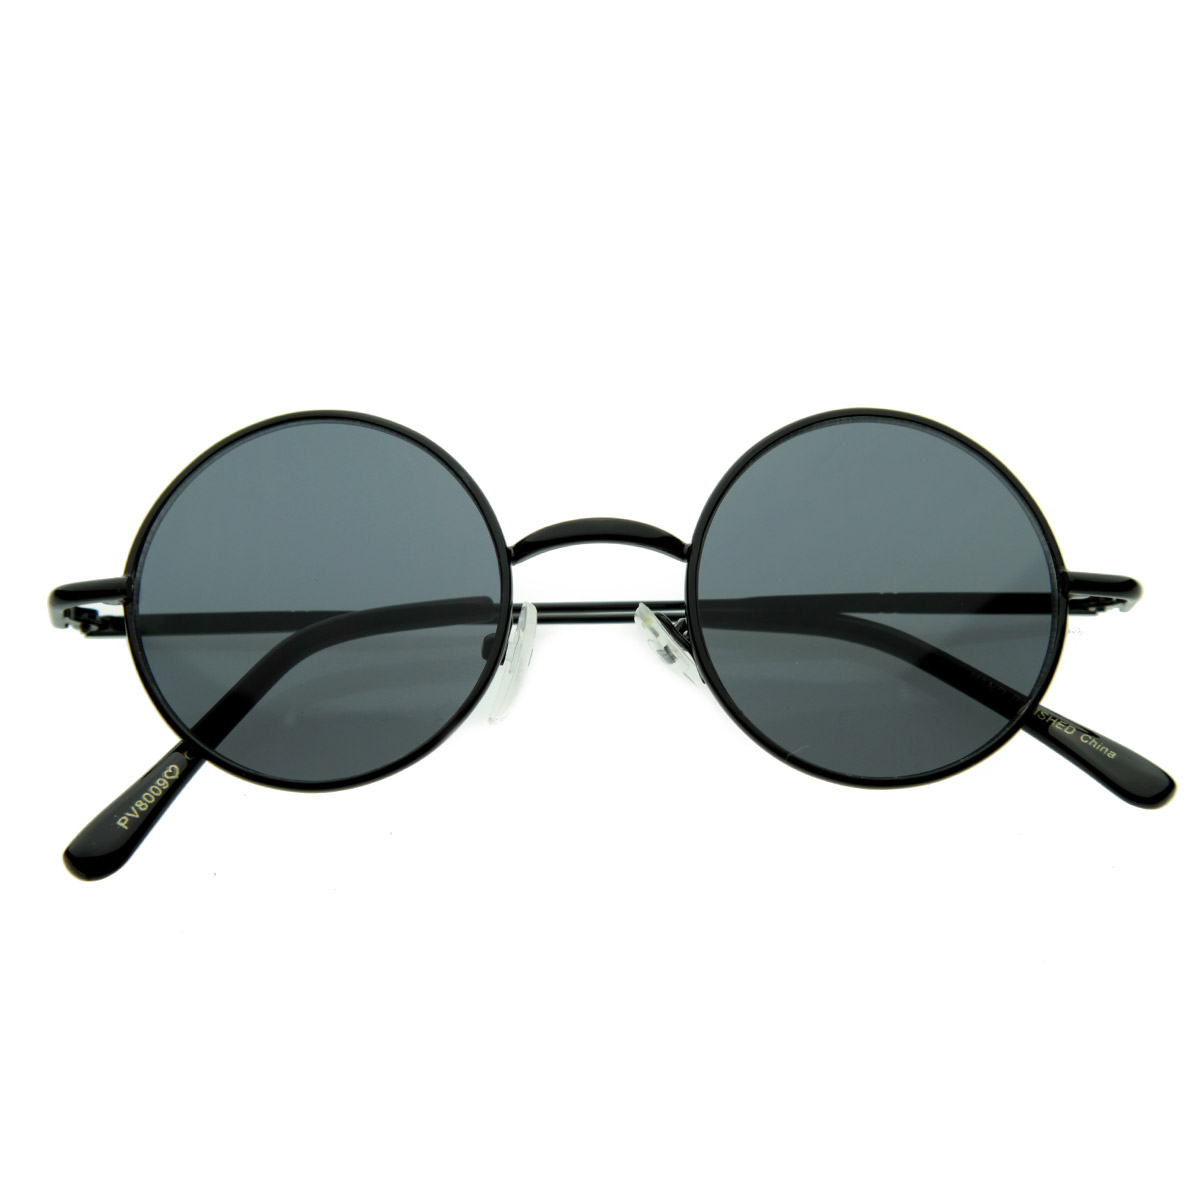 Small Retro Vintage Style Lennon Inspired Round Metal Circle Sunglasses 